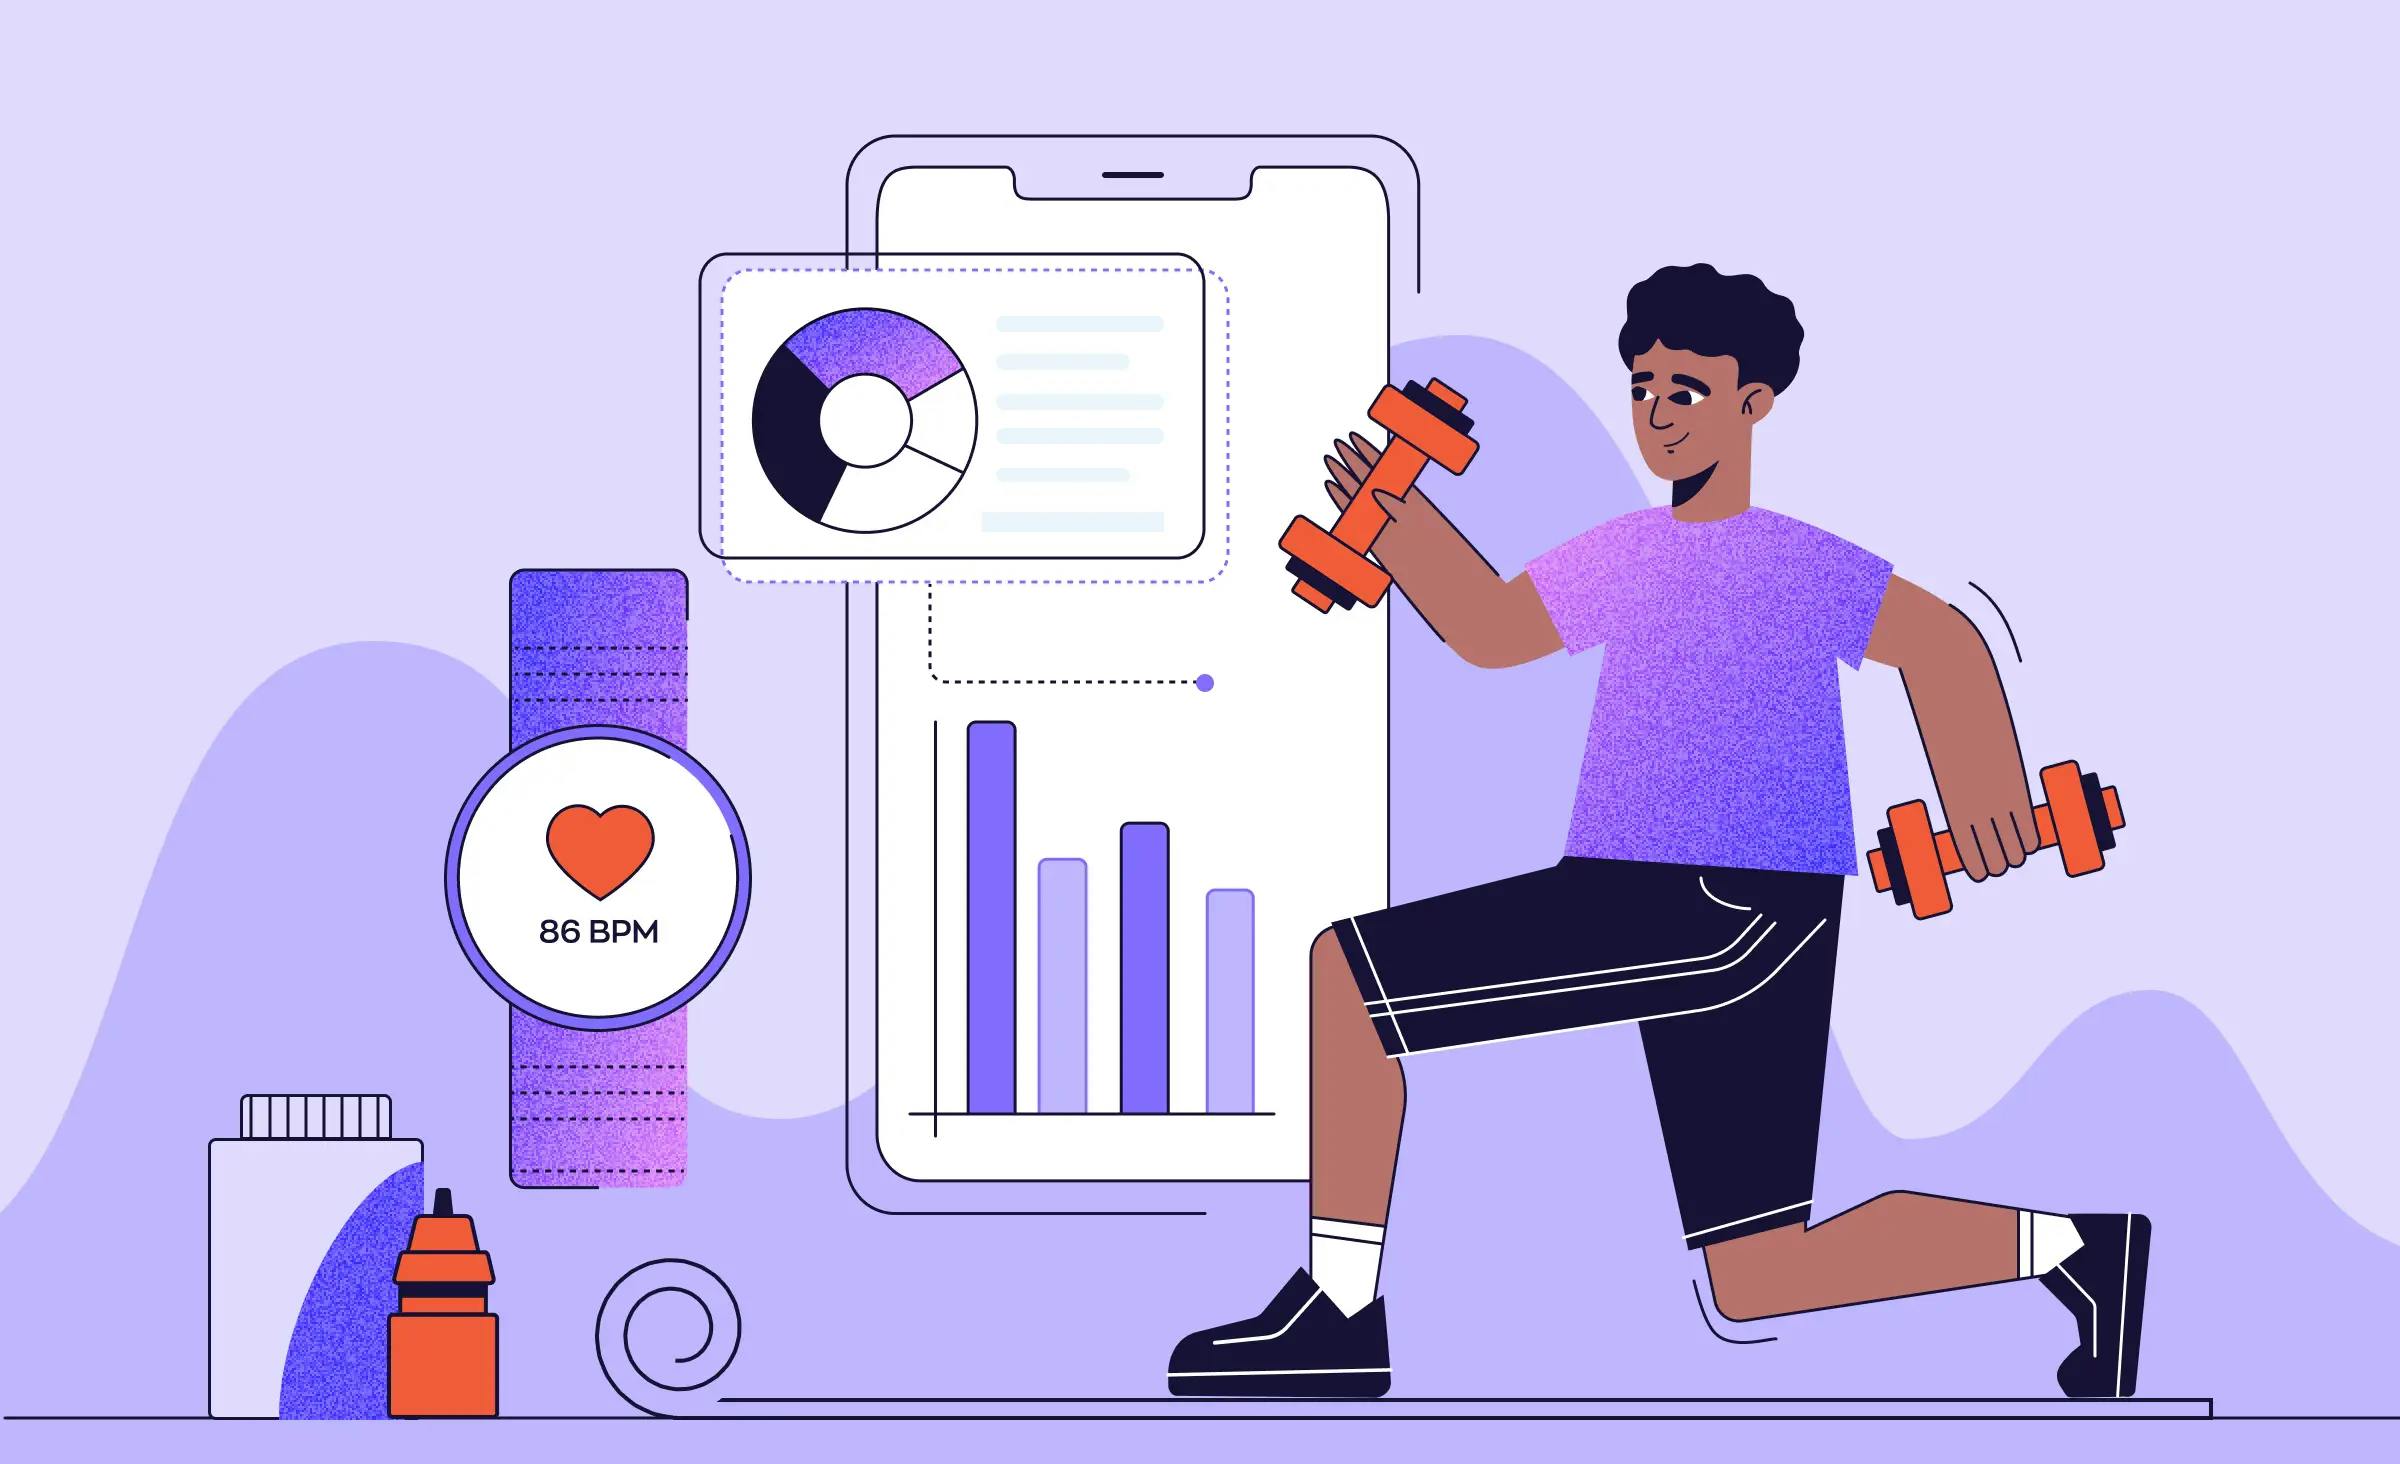 A step-by-step guide to fitness app development.